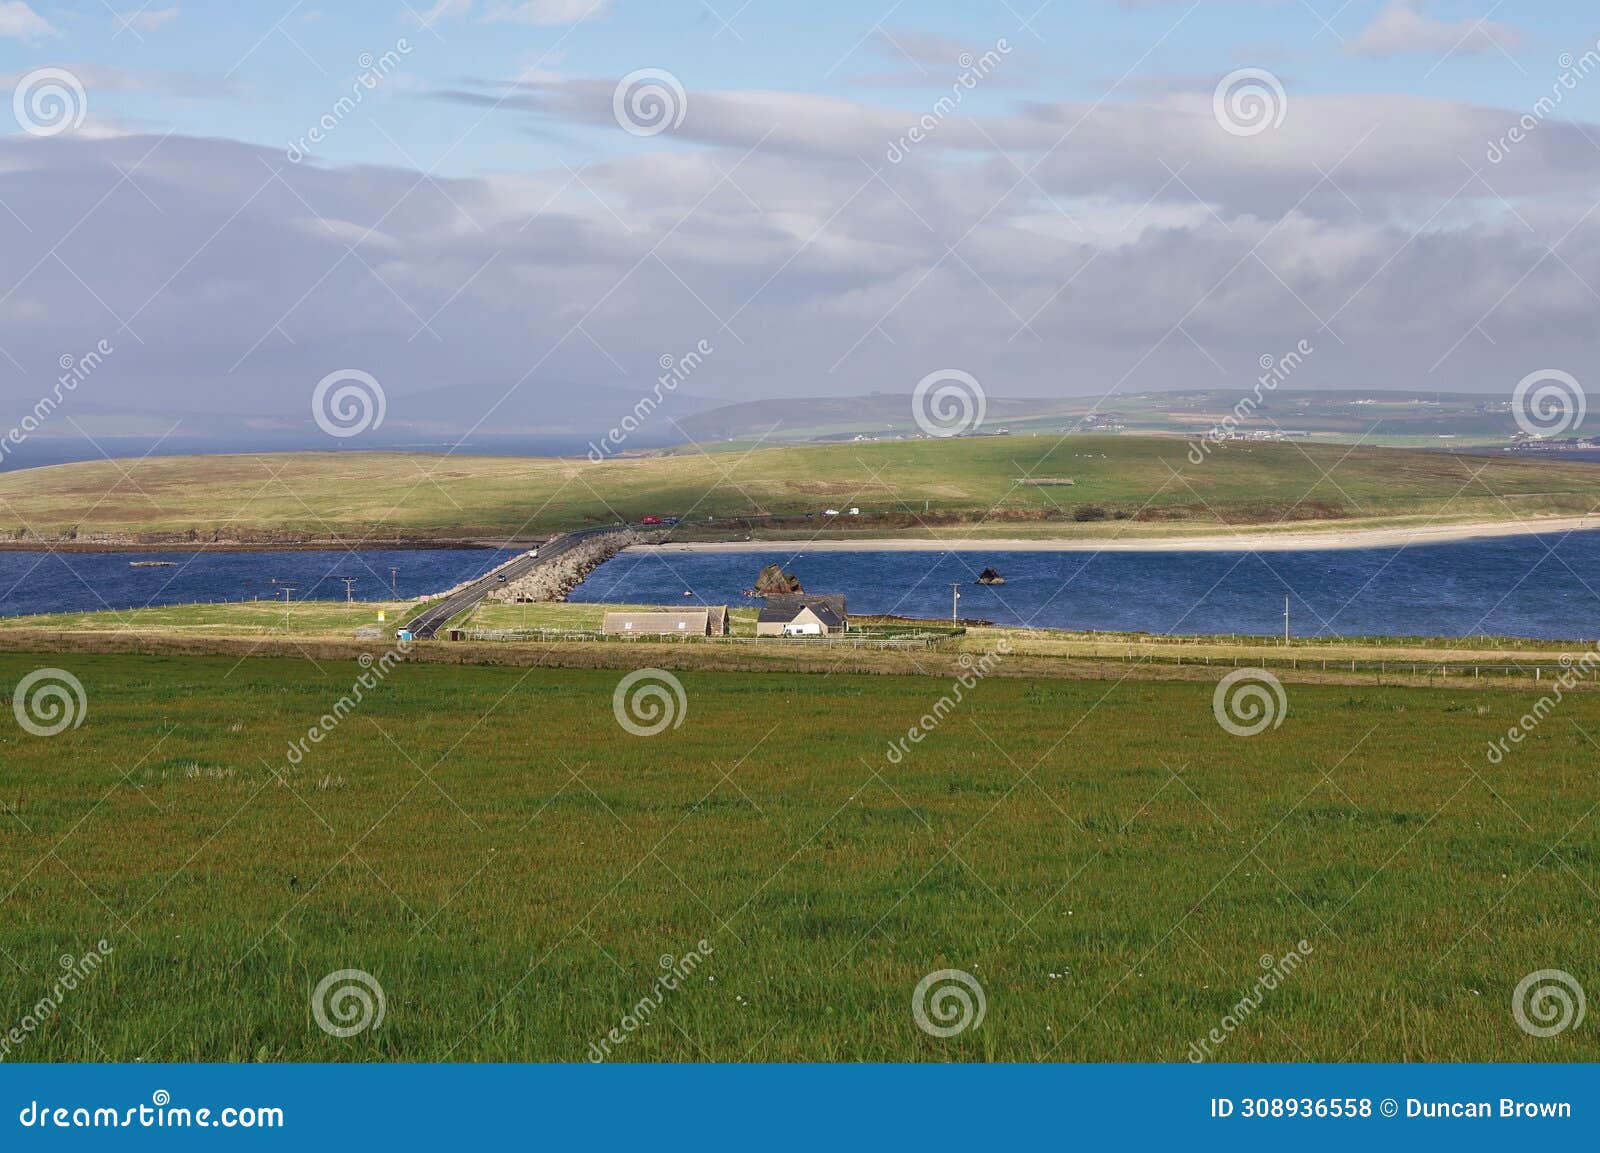 ww1 blockships and ww2 churchill barriers (causeway) used to protect the scapa flow anchorage, orkney, scotland